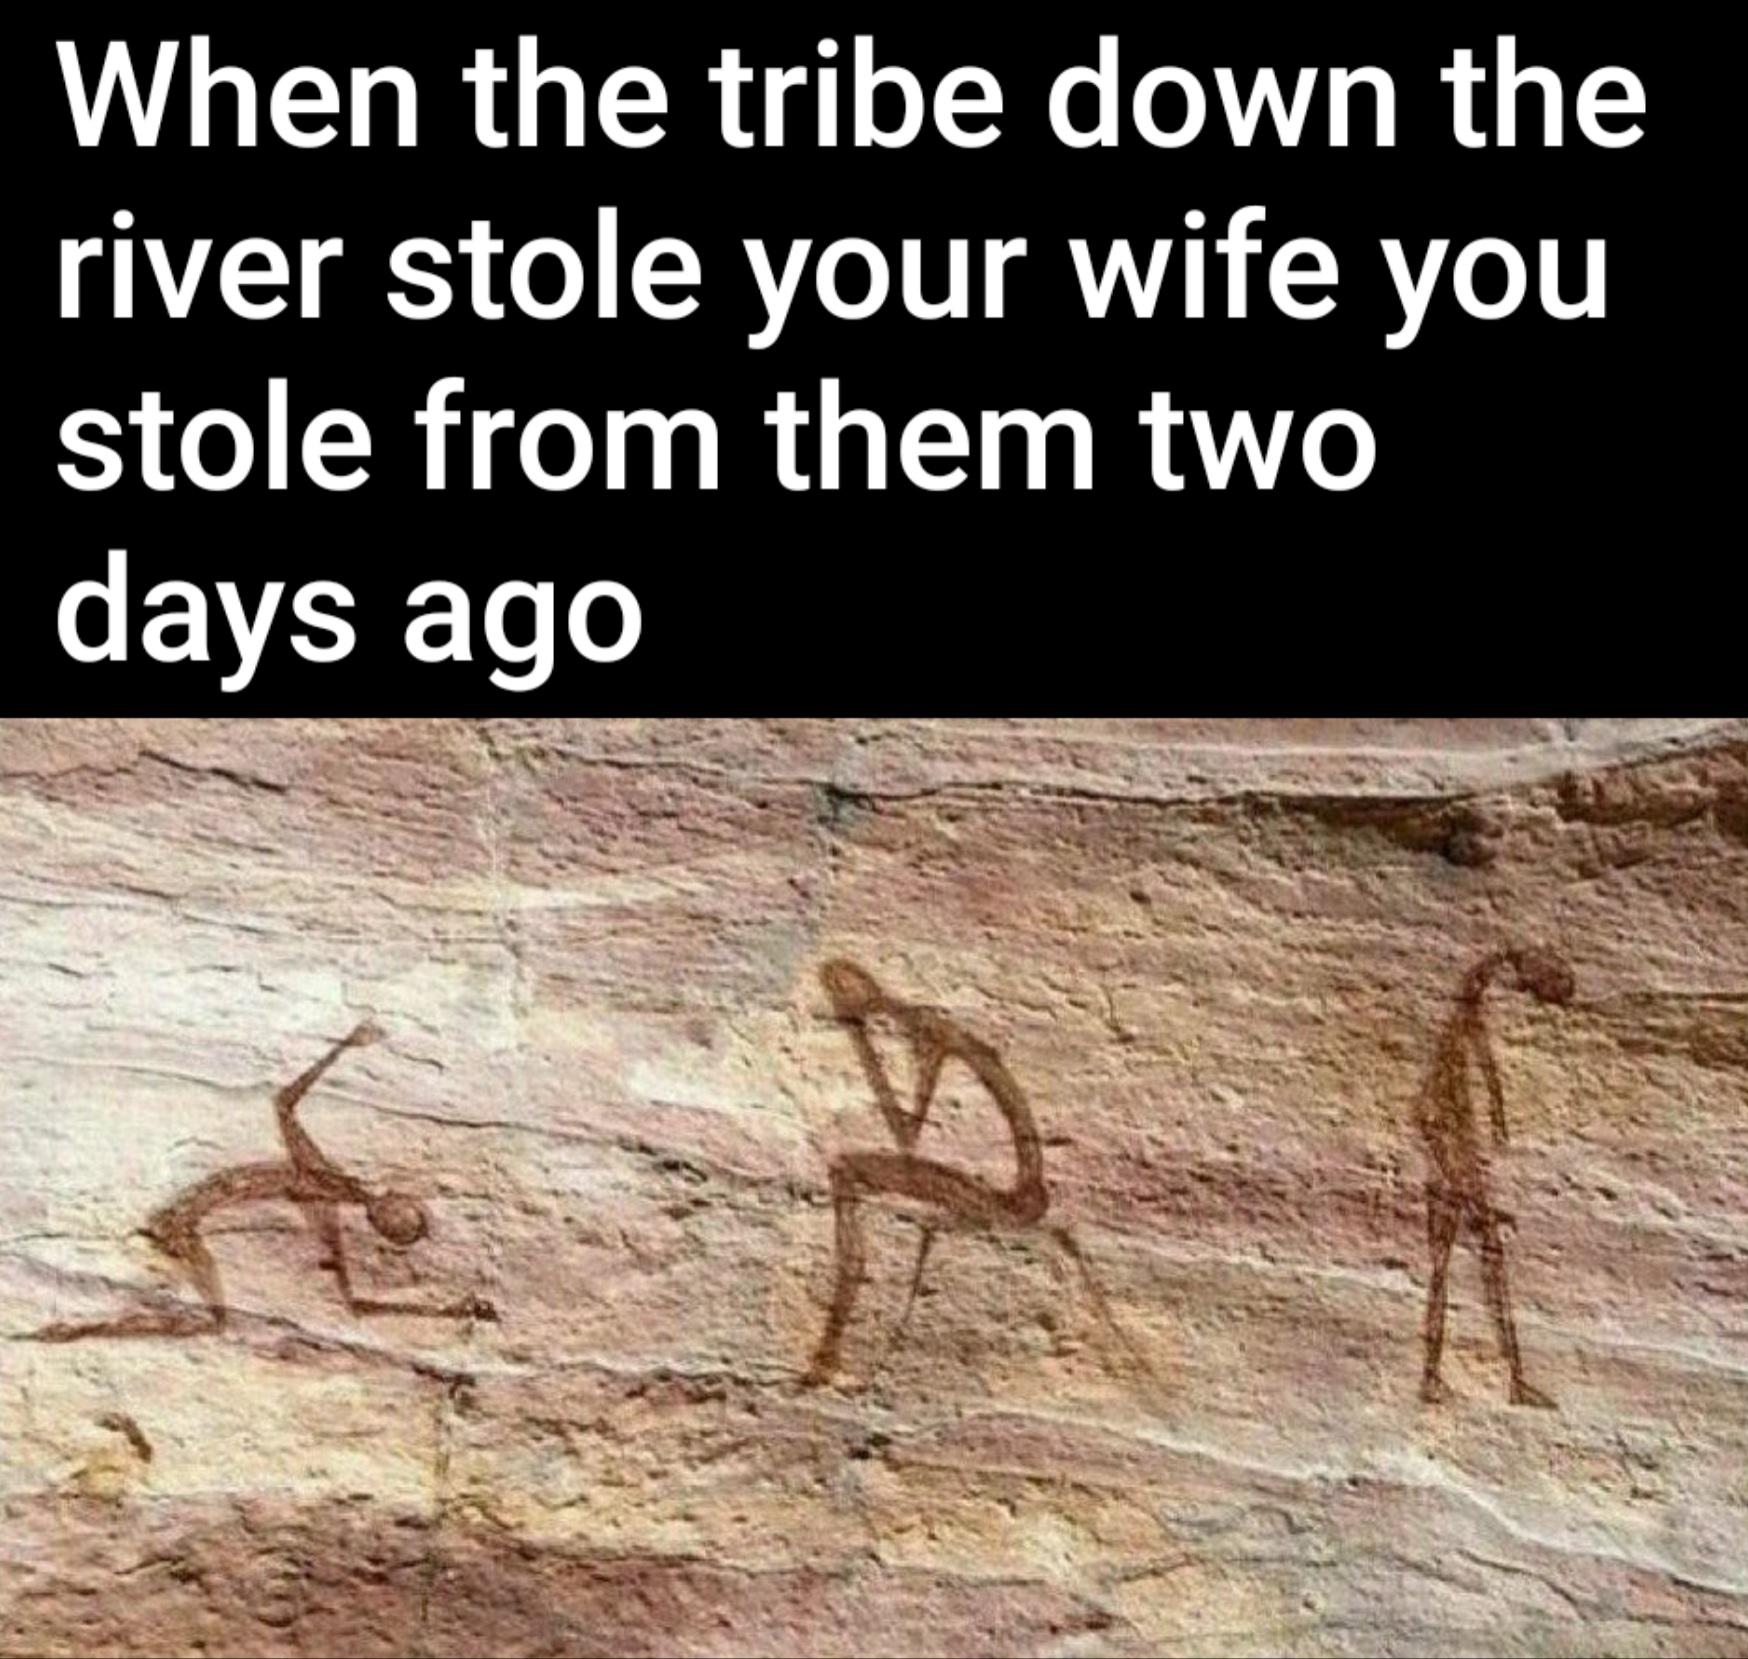 reddit dank memes 2020 - early man cave drawings - When the tribe down the river stole your wife you stole from them two days ago